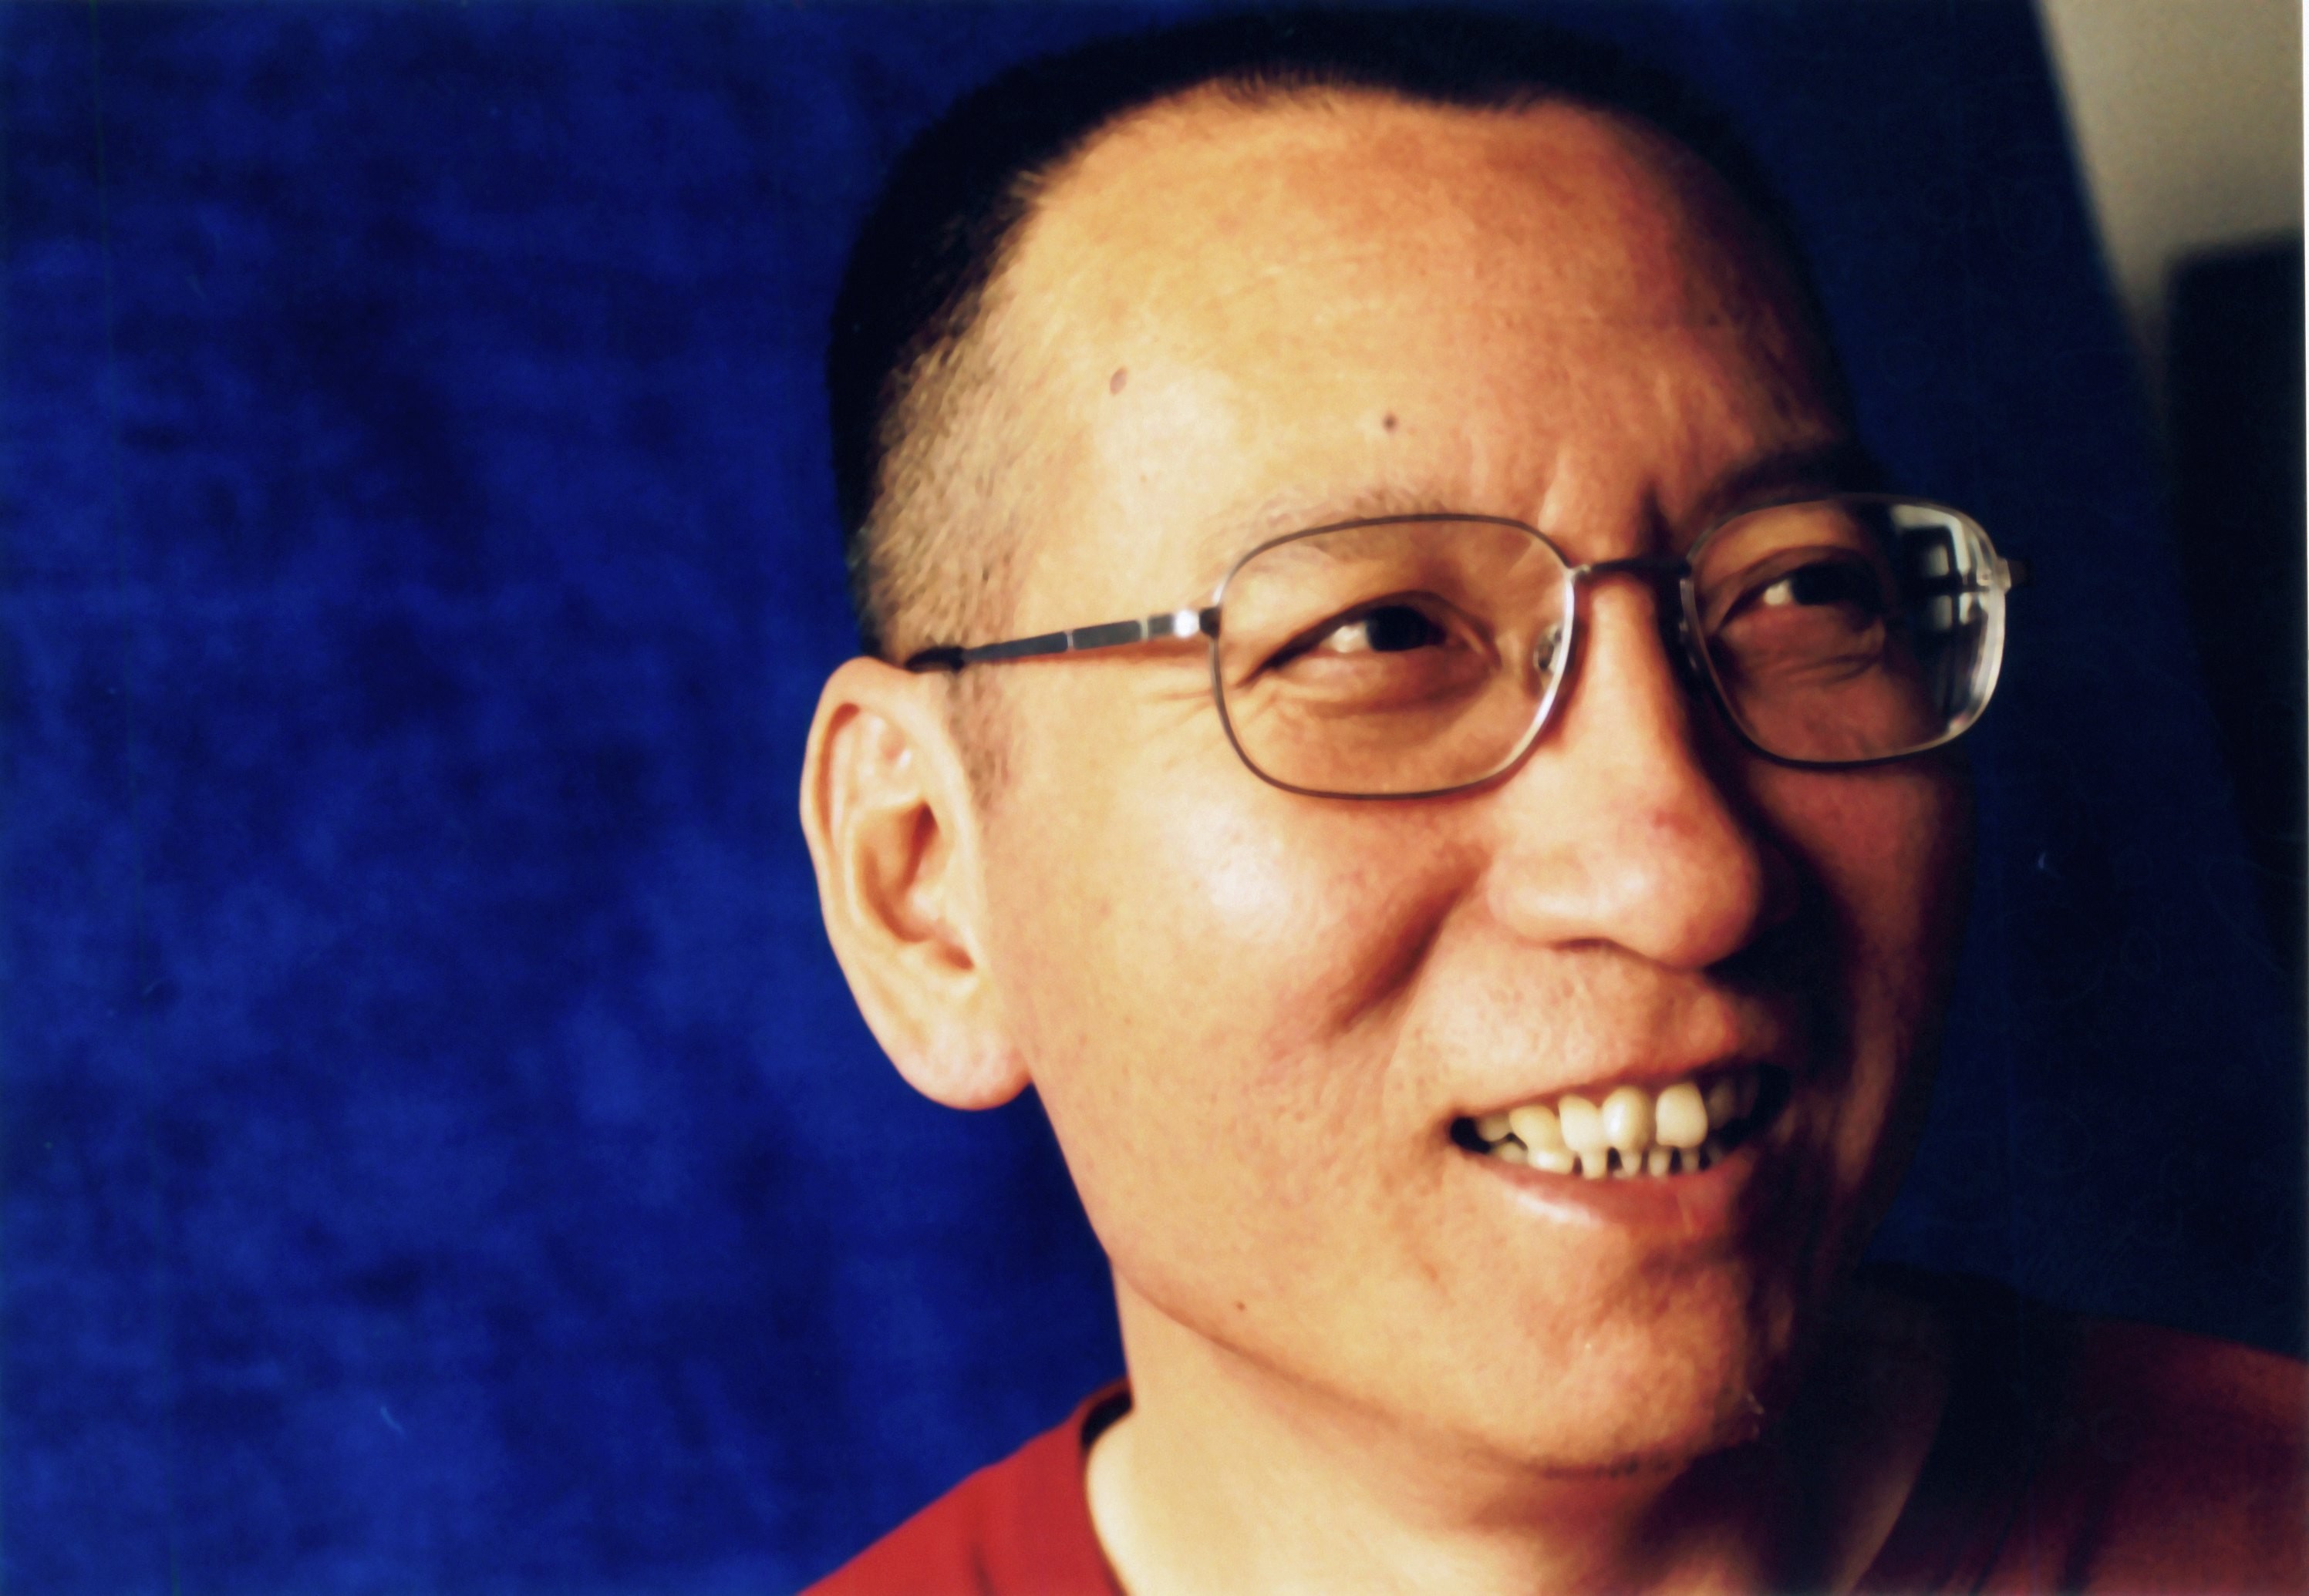 “RIP” and candle emojis were among the Liu Xiaobo tributes censored online in China. Photo: EPA